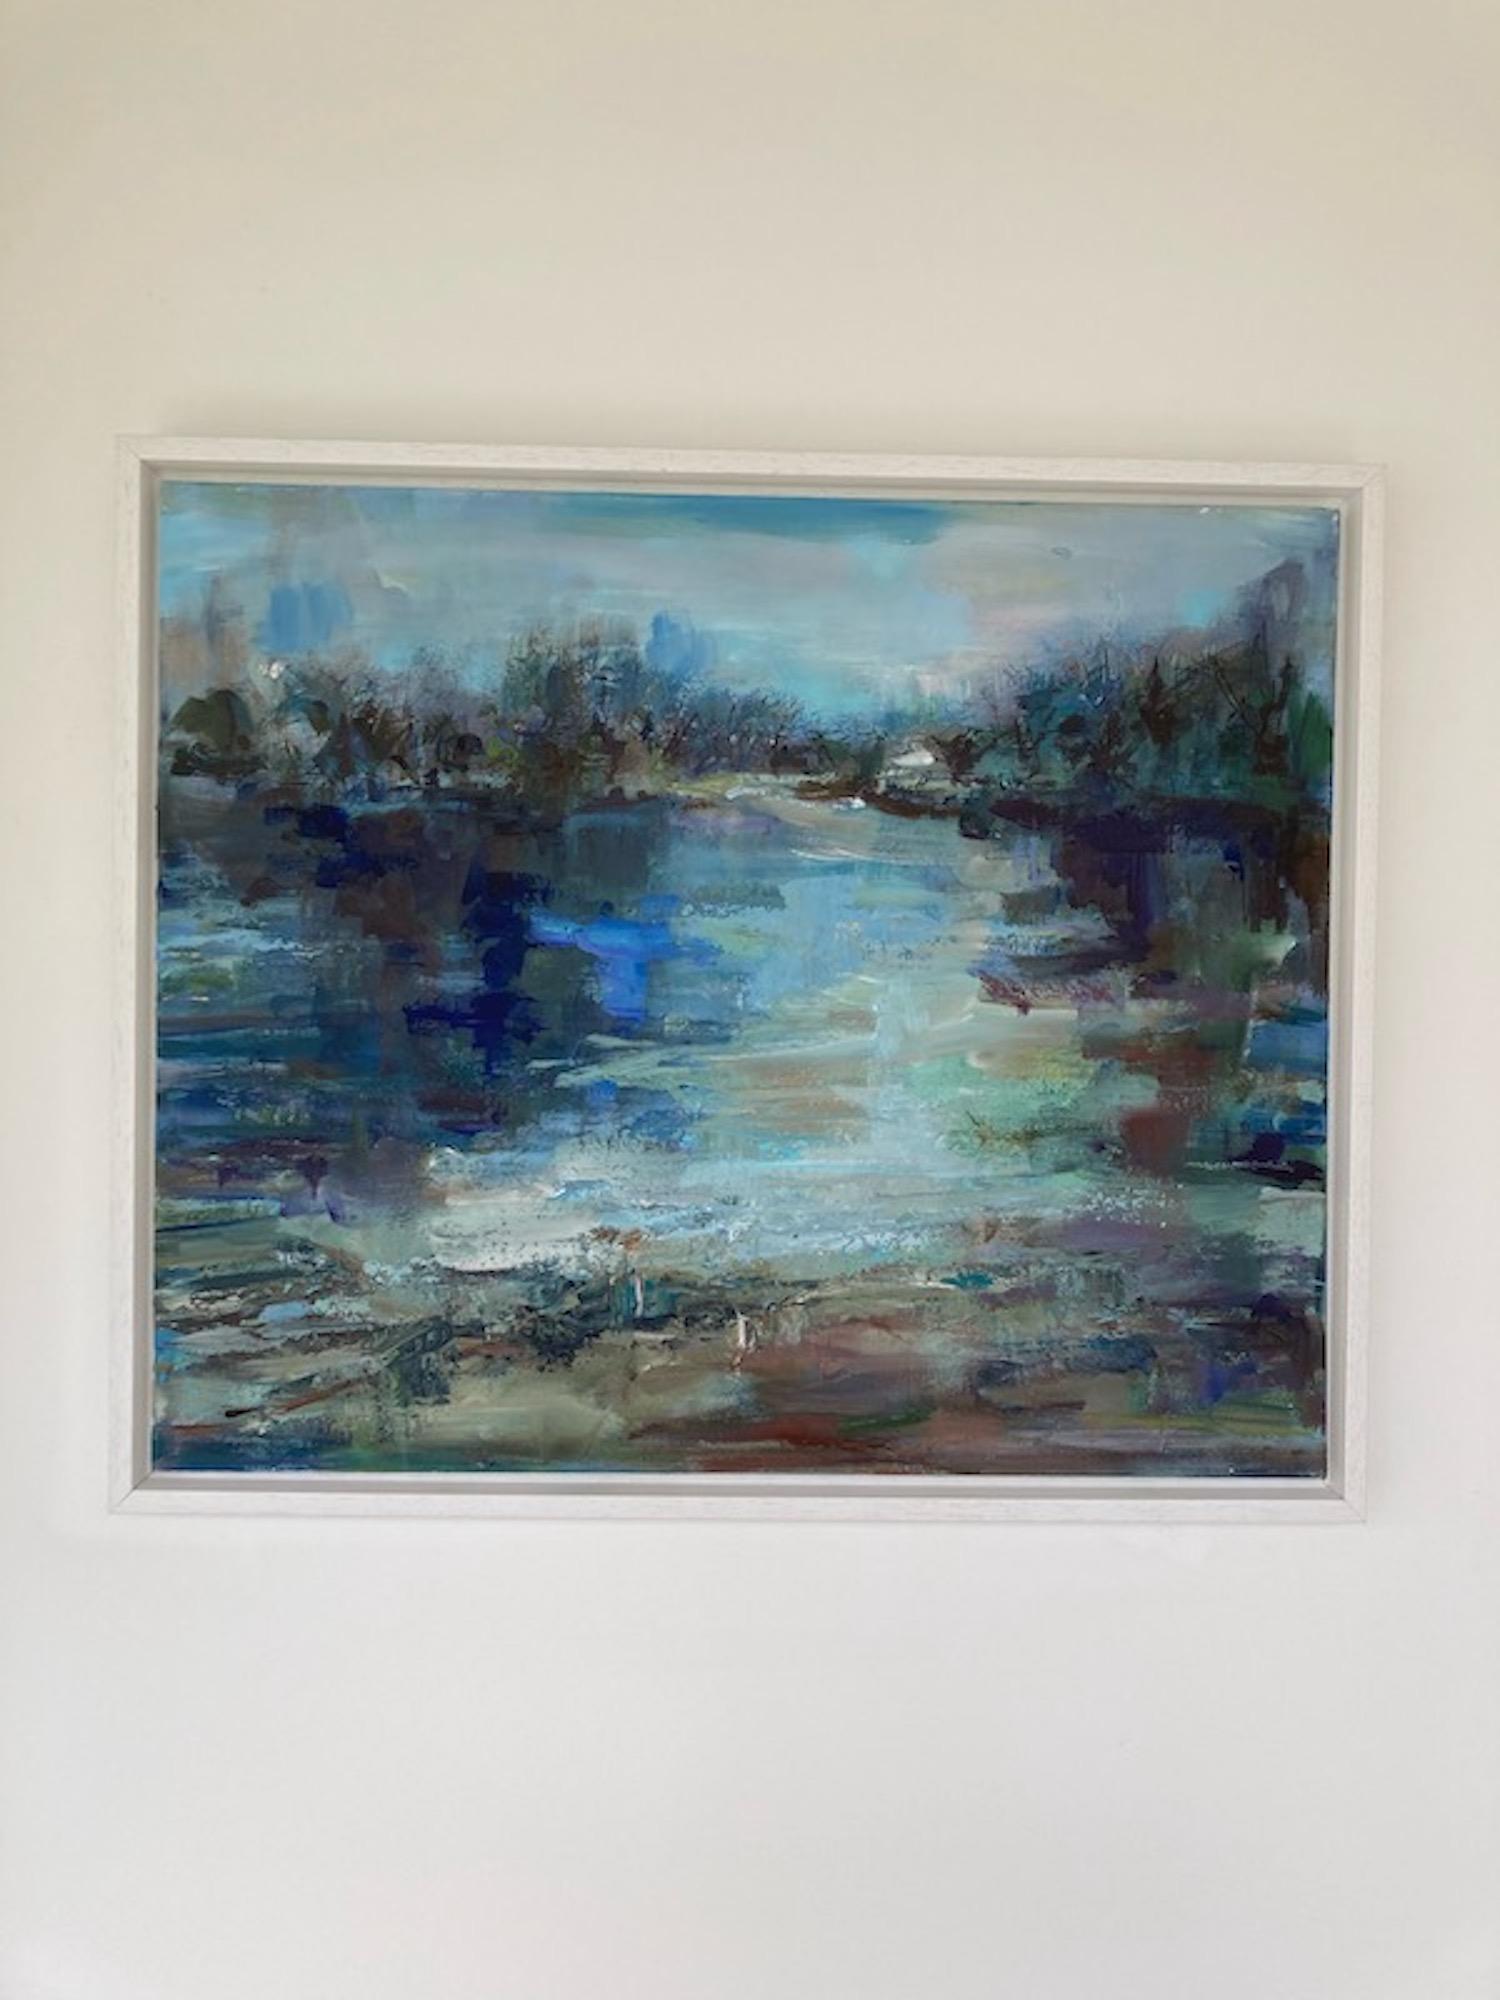 Somerset Lake by Joanna Commings [2021]
original and hang signed by the artist 

Acrylics on canvas

Image size: H:50 cm x W:60 cm

Complete Size of Unframed Work: H:50 cm x W:60 cm x D:2cm

Frame Size: H:55 cm x W:65 cm x D:4cm

Sold Framed

Please